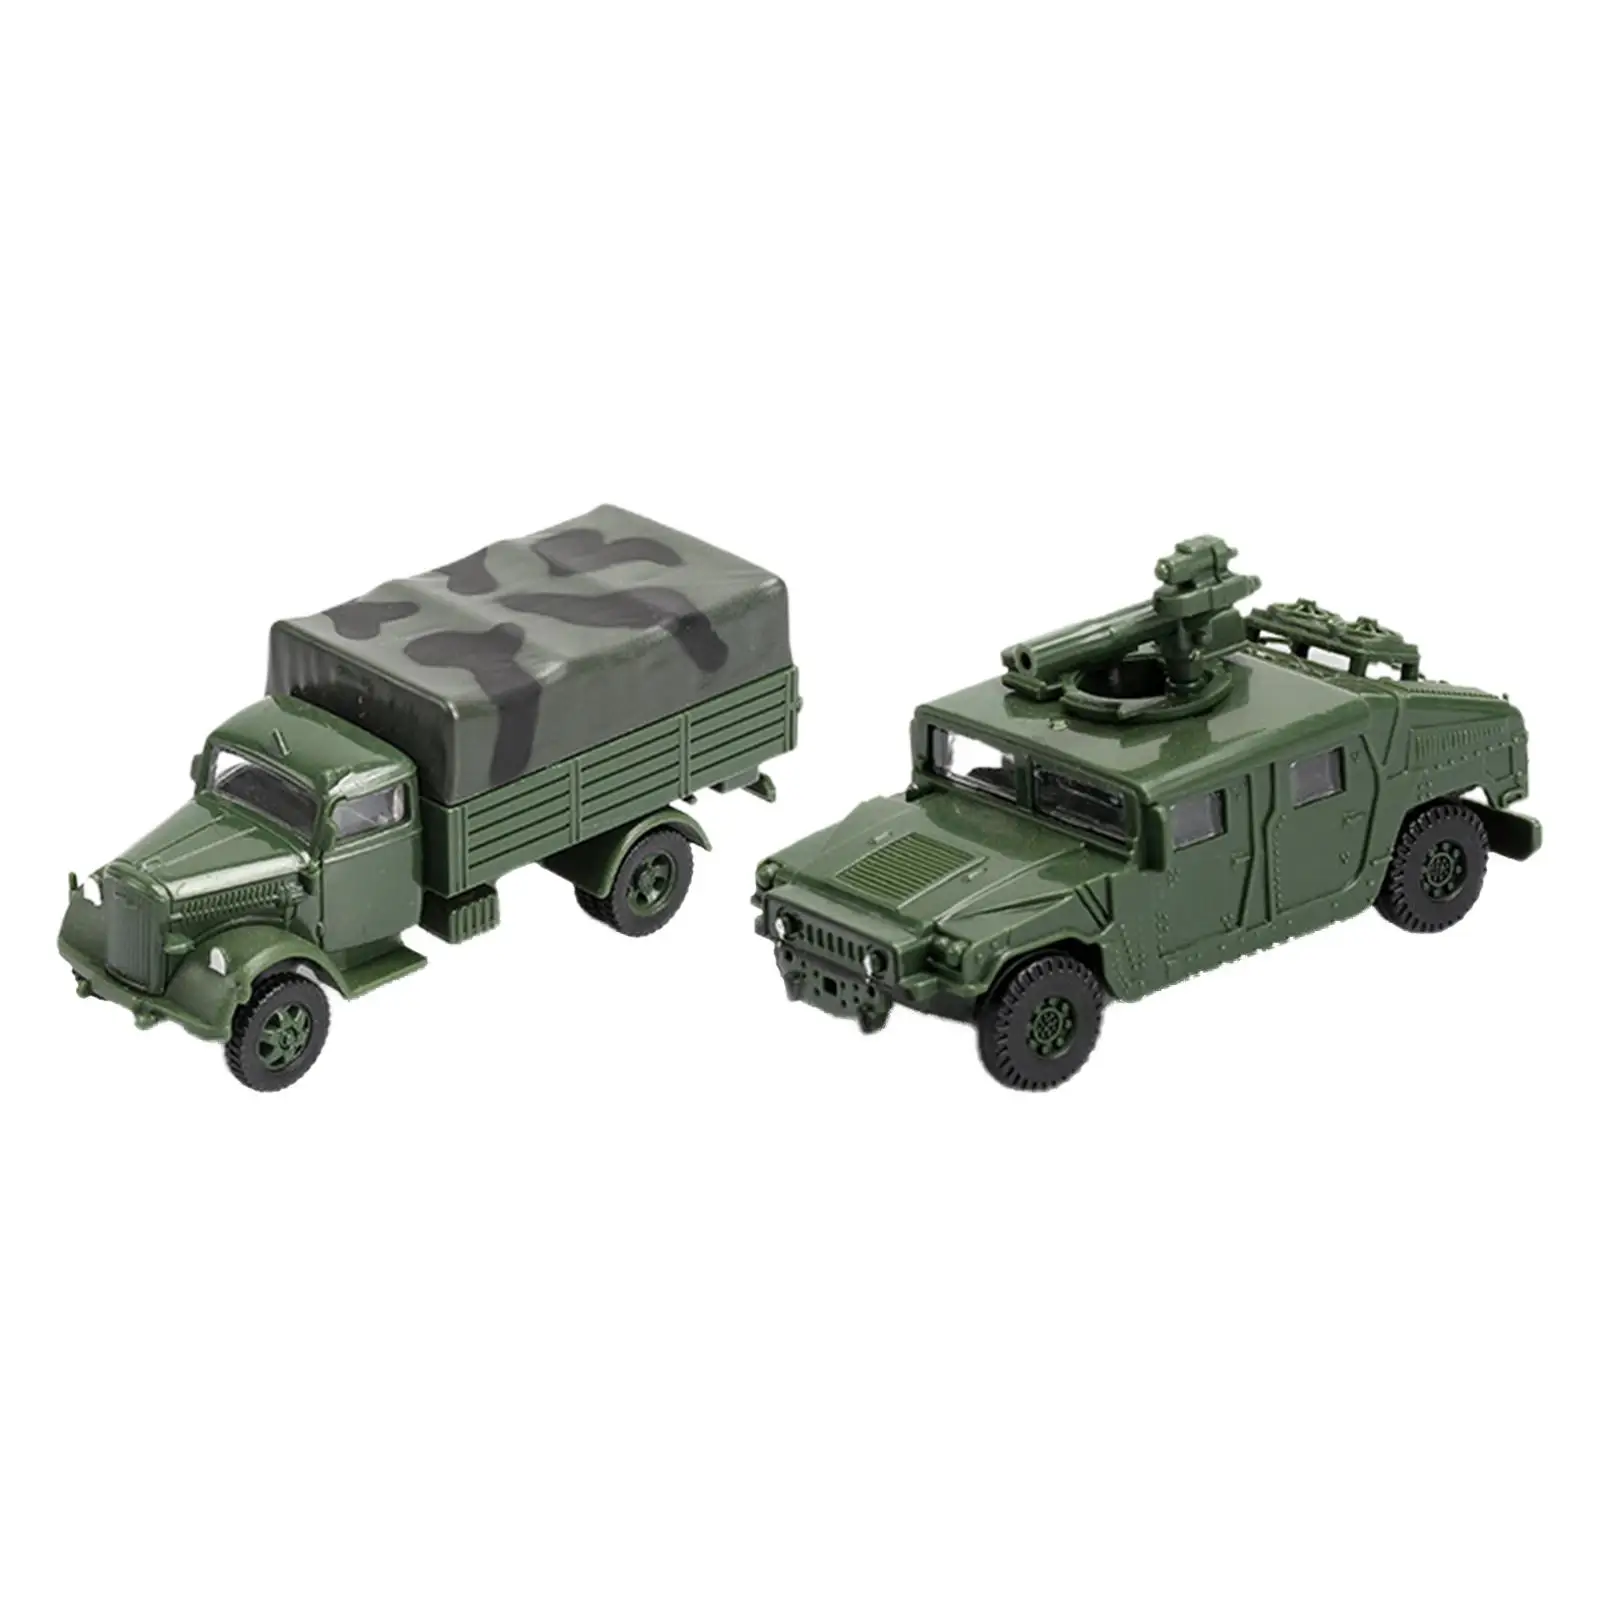 2 Pieces Miniatures 1:72 Assemble American Humvee Kits Hobby Building Puzzle Ornaments for Christmas Present Desktop Kids Gifts